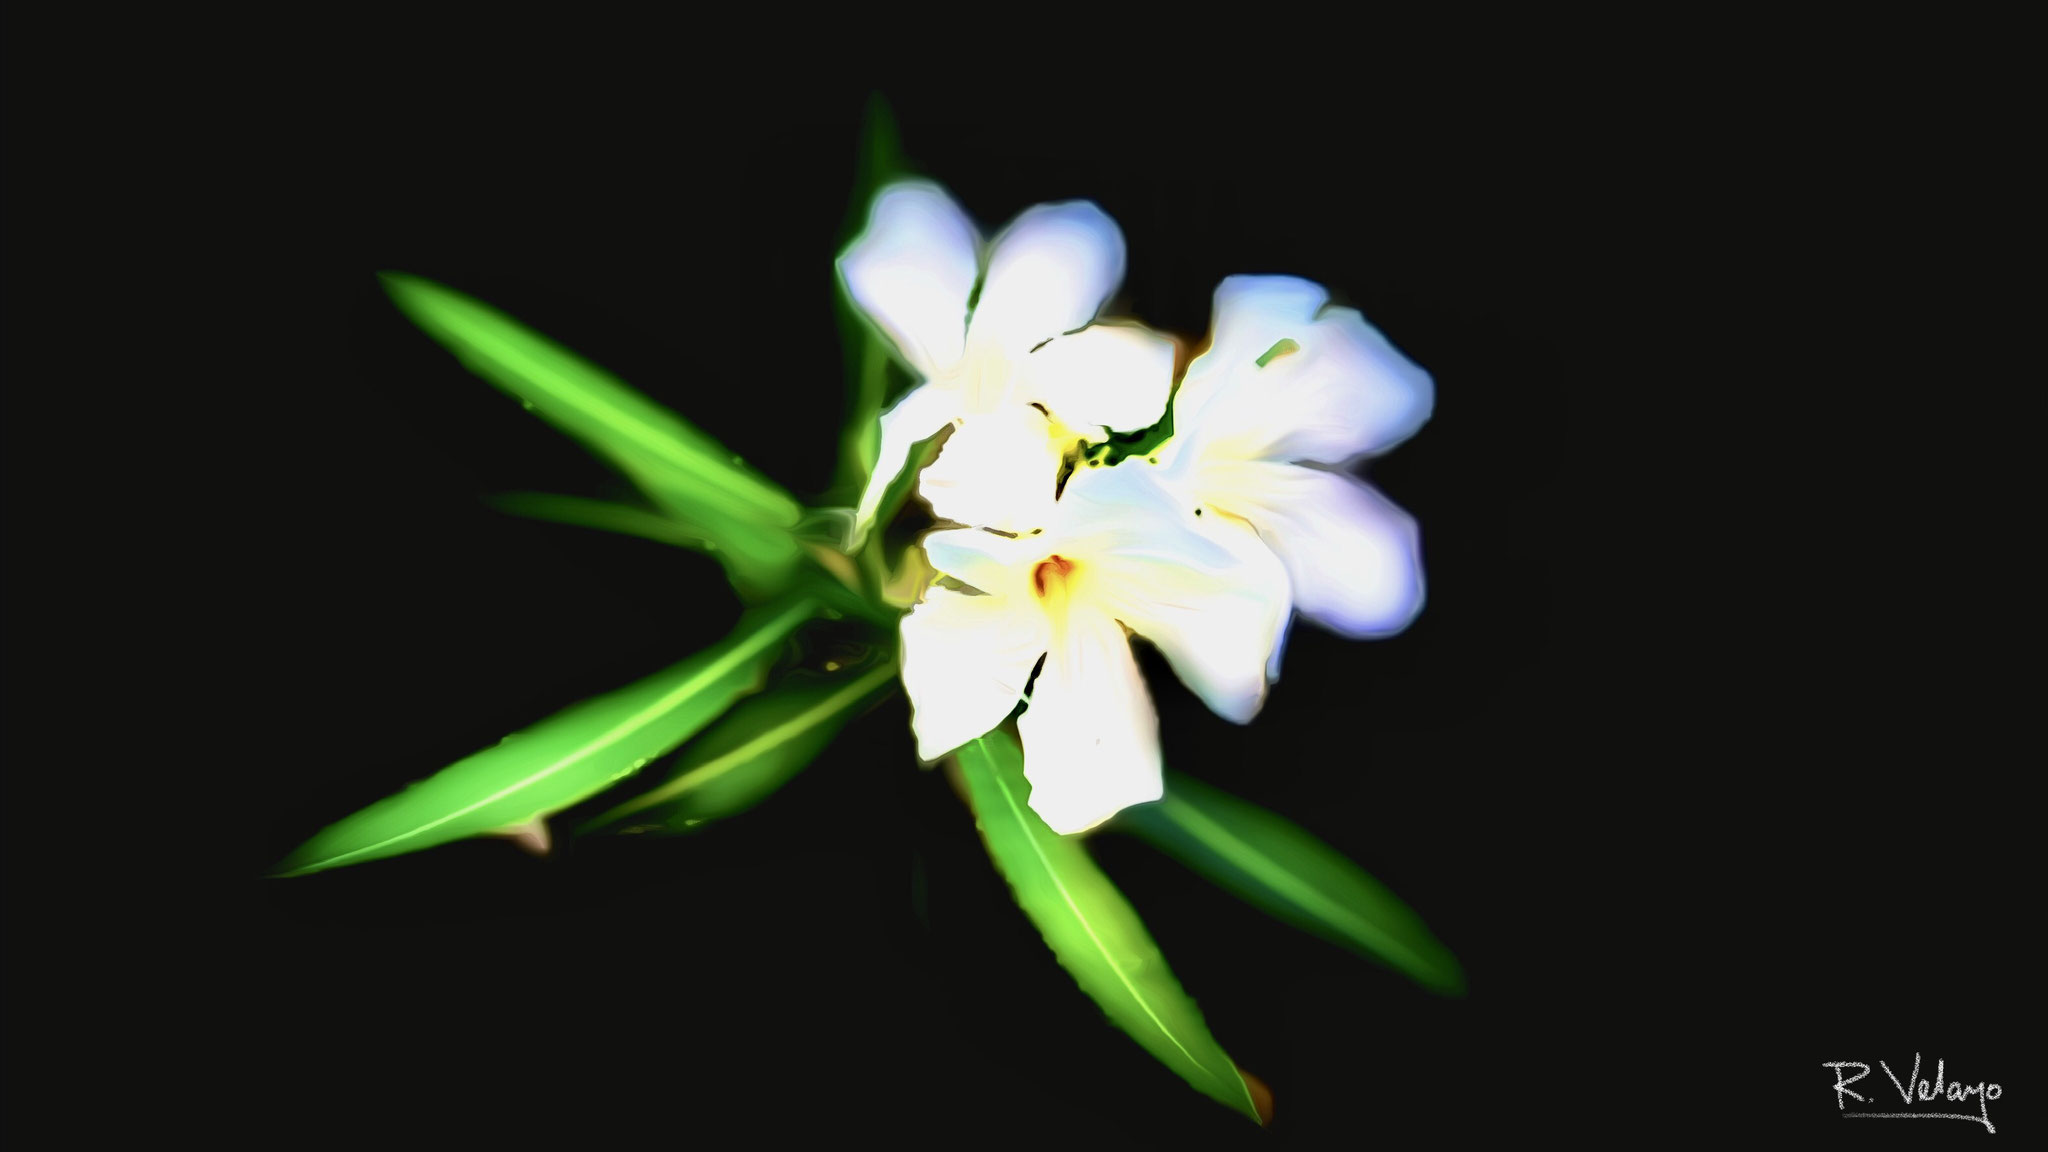 "GHOSTLY IMAGE OF FIVE-PETAL WHITE FLOWERS" [Created: 9/08/2022]